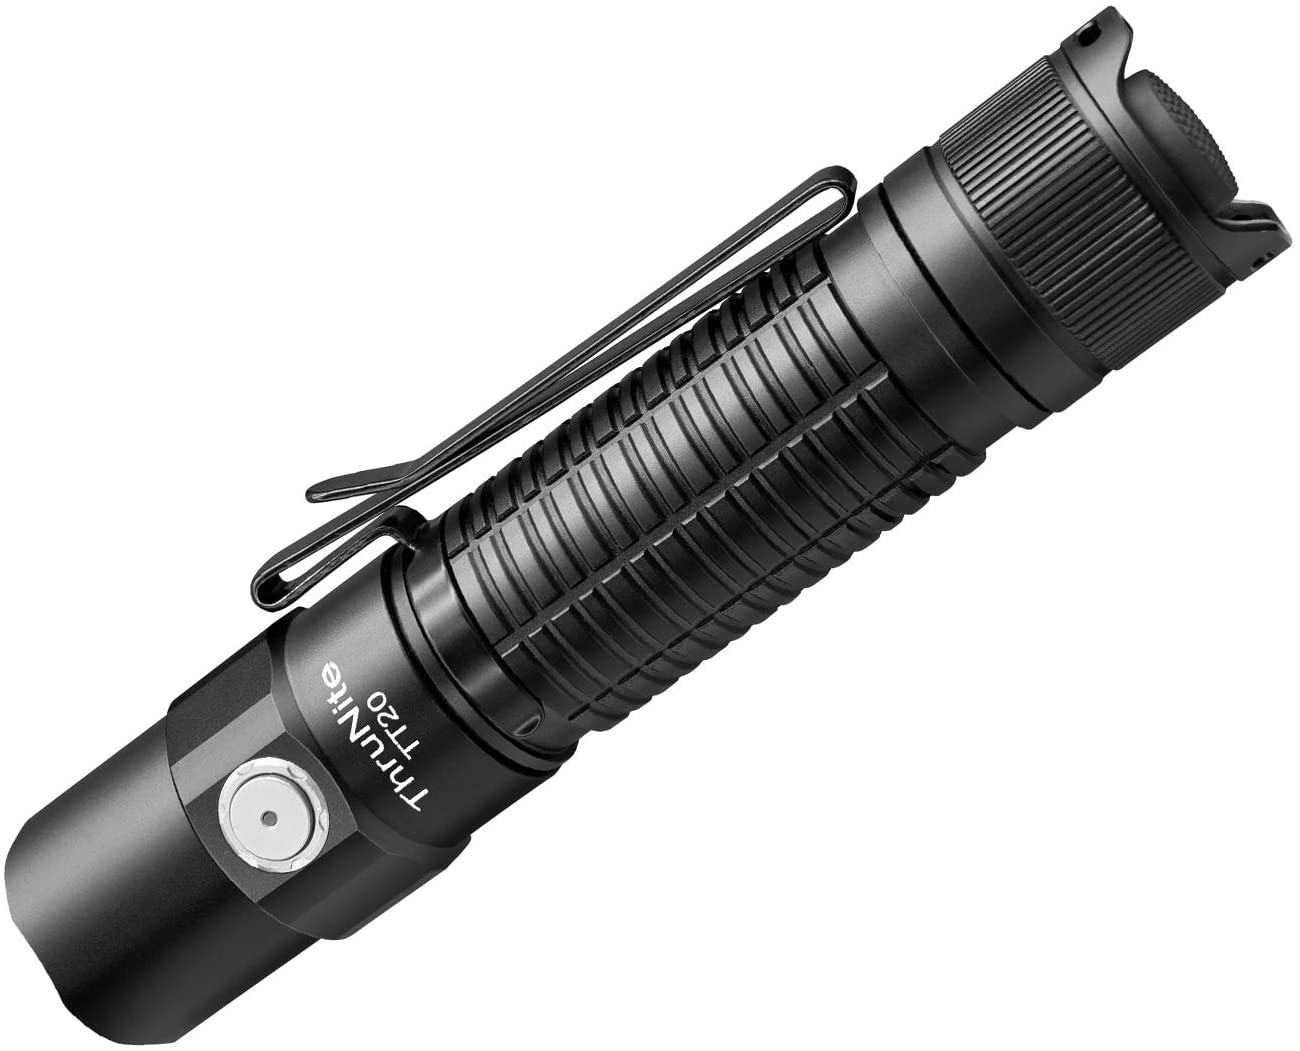 Prime Day Deal for ThruNite TT20, 2526 Lumens Max, 21700 Battery Included $52.46